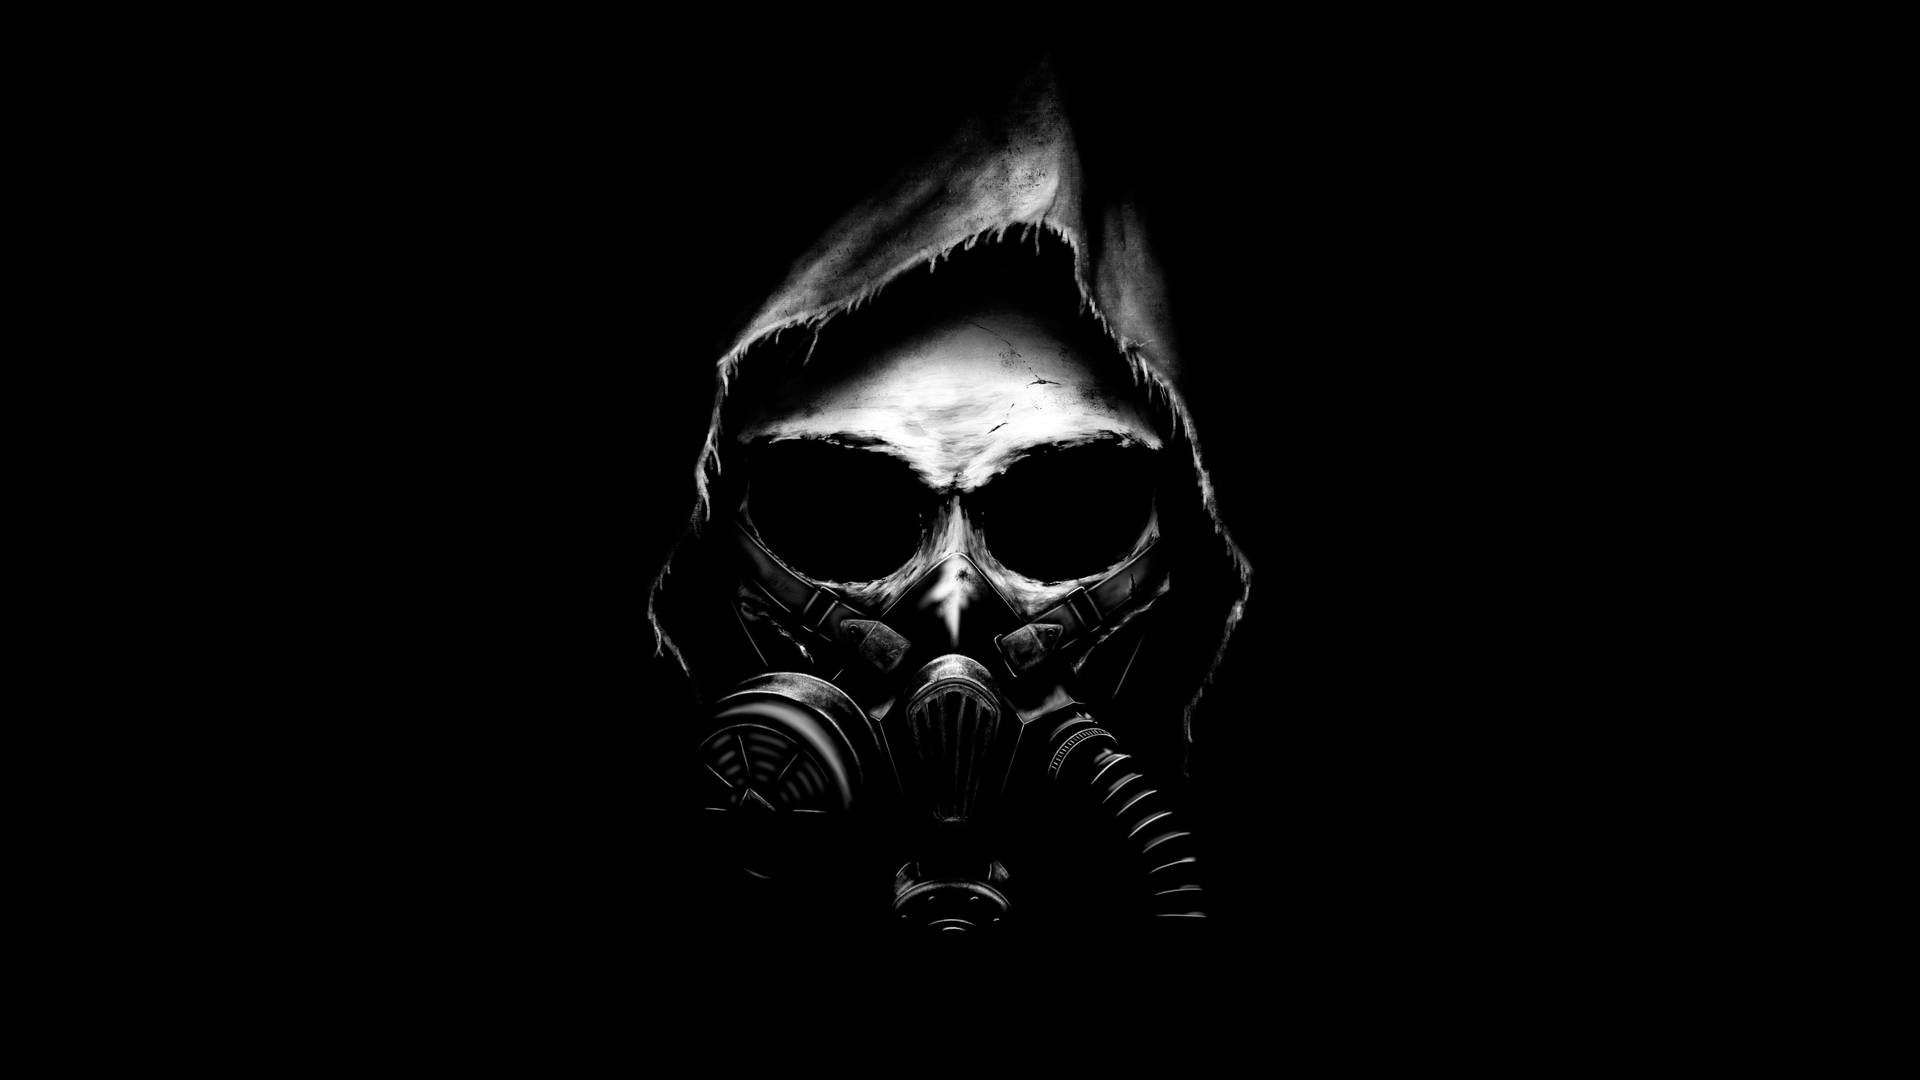 Mysterious Figure in Mask on Black Background Wallpaper